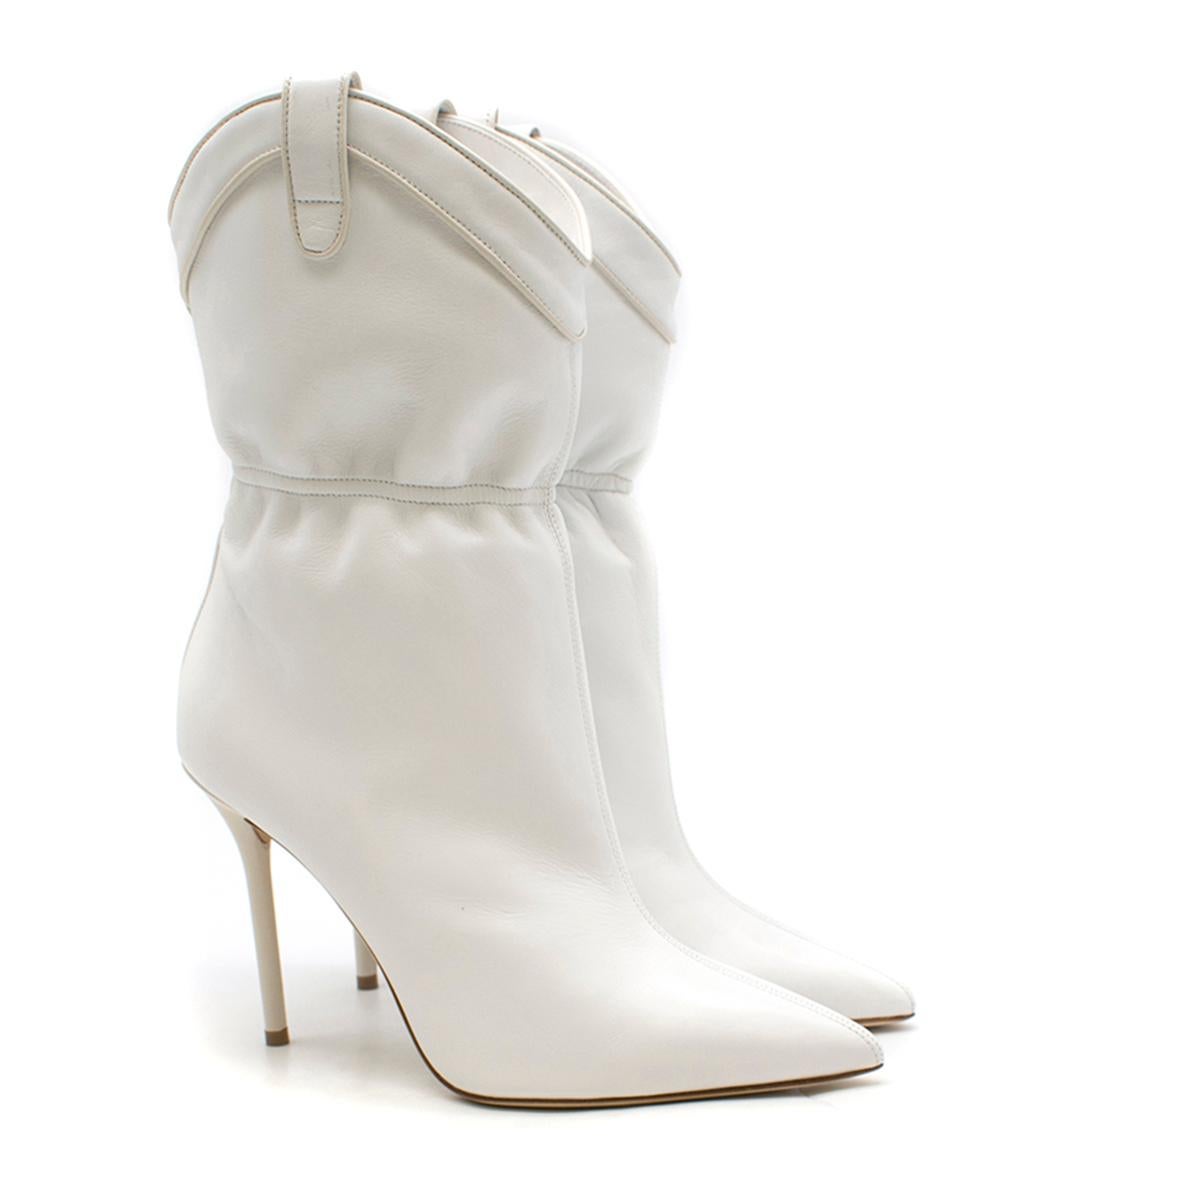 Malone Souliers Daisy 100 white leather ankle boots

- White, smooth leather 
- Point toe, leather-covered high stiletto heel 
- Seamed front feature 
- Western-style side panels, leather pull tabs 
- Elasticated ankle trim 
- Nude leather lining